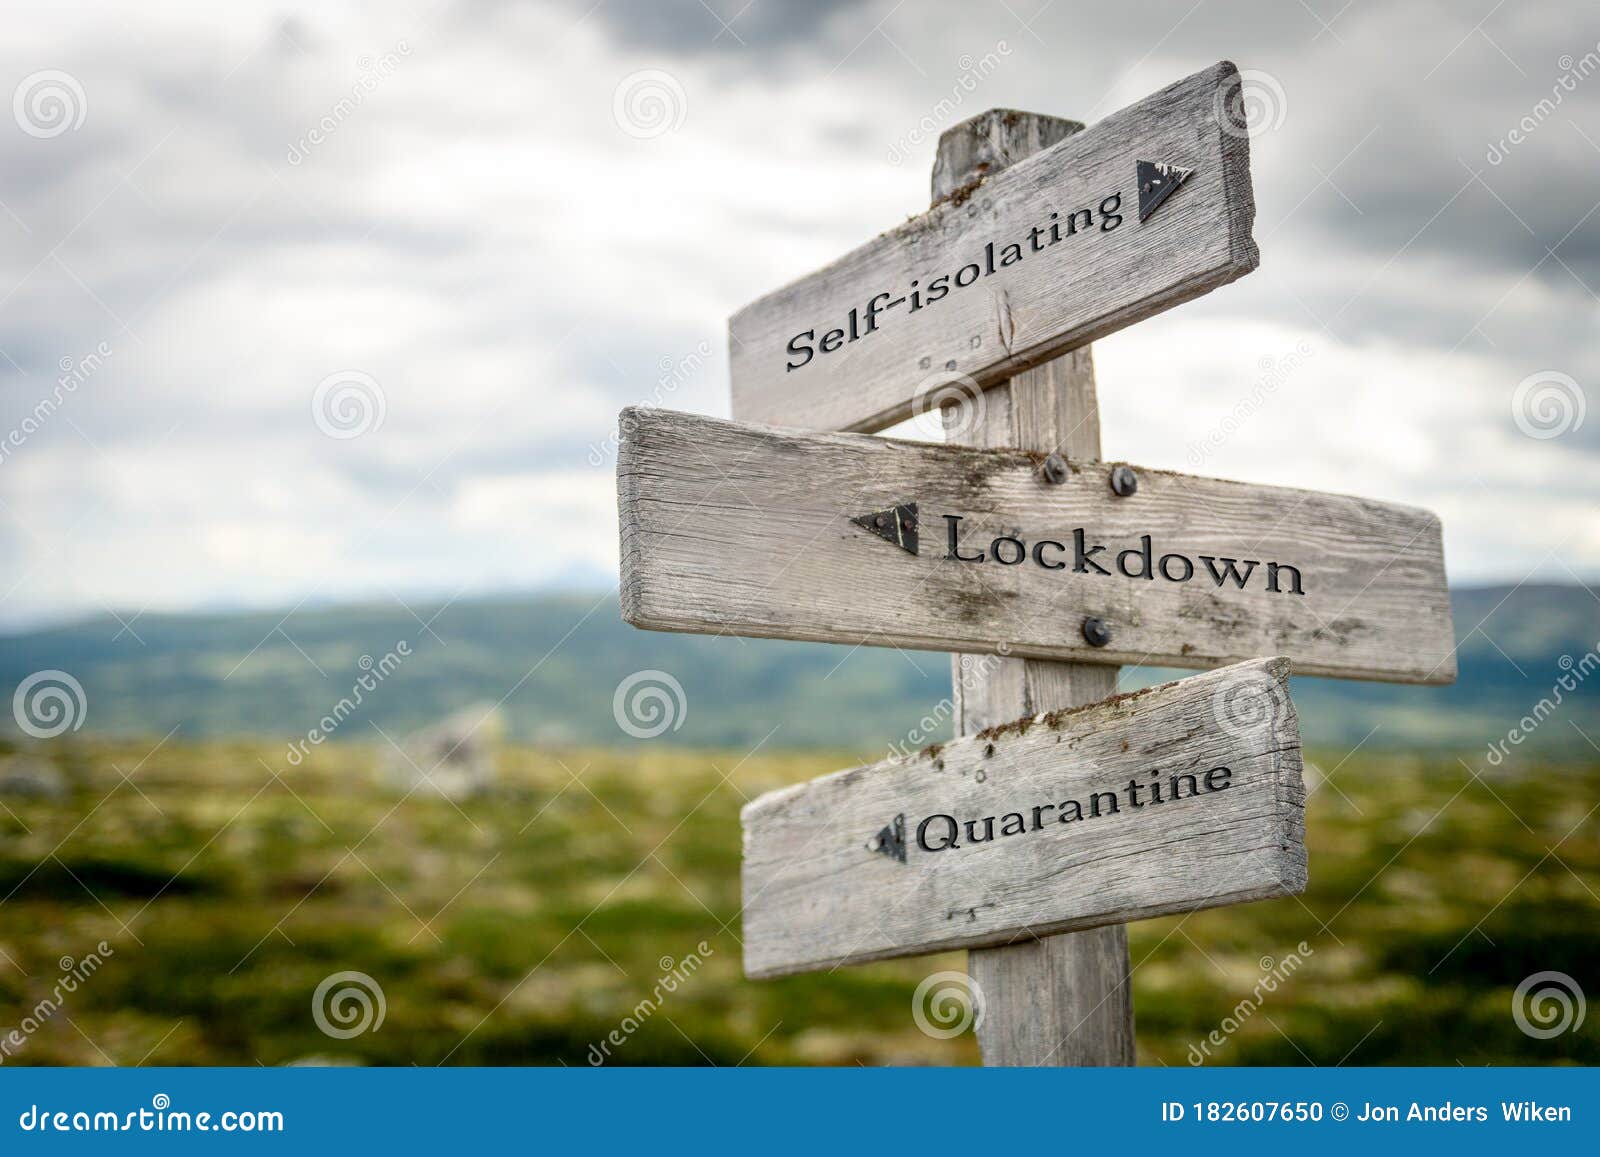 self-isolation lockdown quarantine text engraved on old wooden signpost outdoors in nature